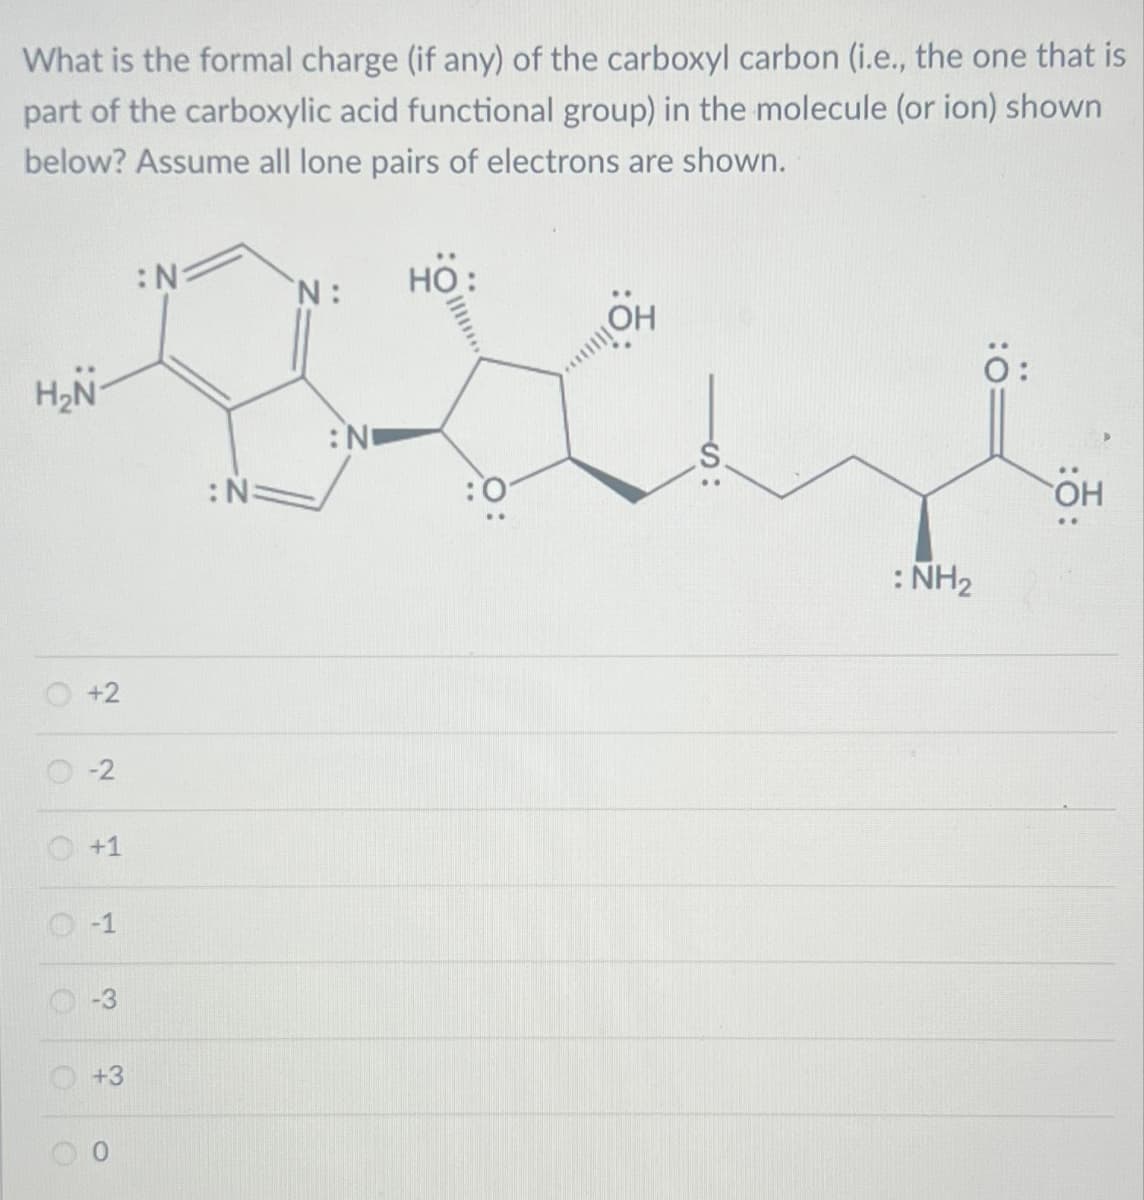 What is the formal charge (if any) of the carboxyl carbon (i.e., the one that is
part of the carboxylic acid functional group) in the molecule (or ion) shown
below? Assume all lone pairs of electrons are shown.
H₂N-
+2
-2
+1
-1
3
+3
O
O
:N:
:N
N: HO:
: NO
: NH₂
Ö:
OH